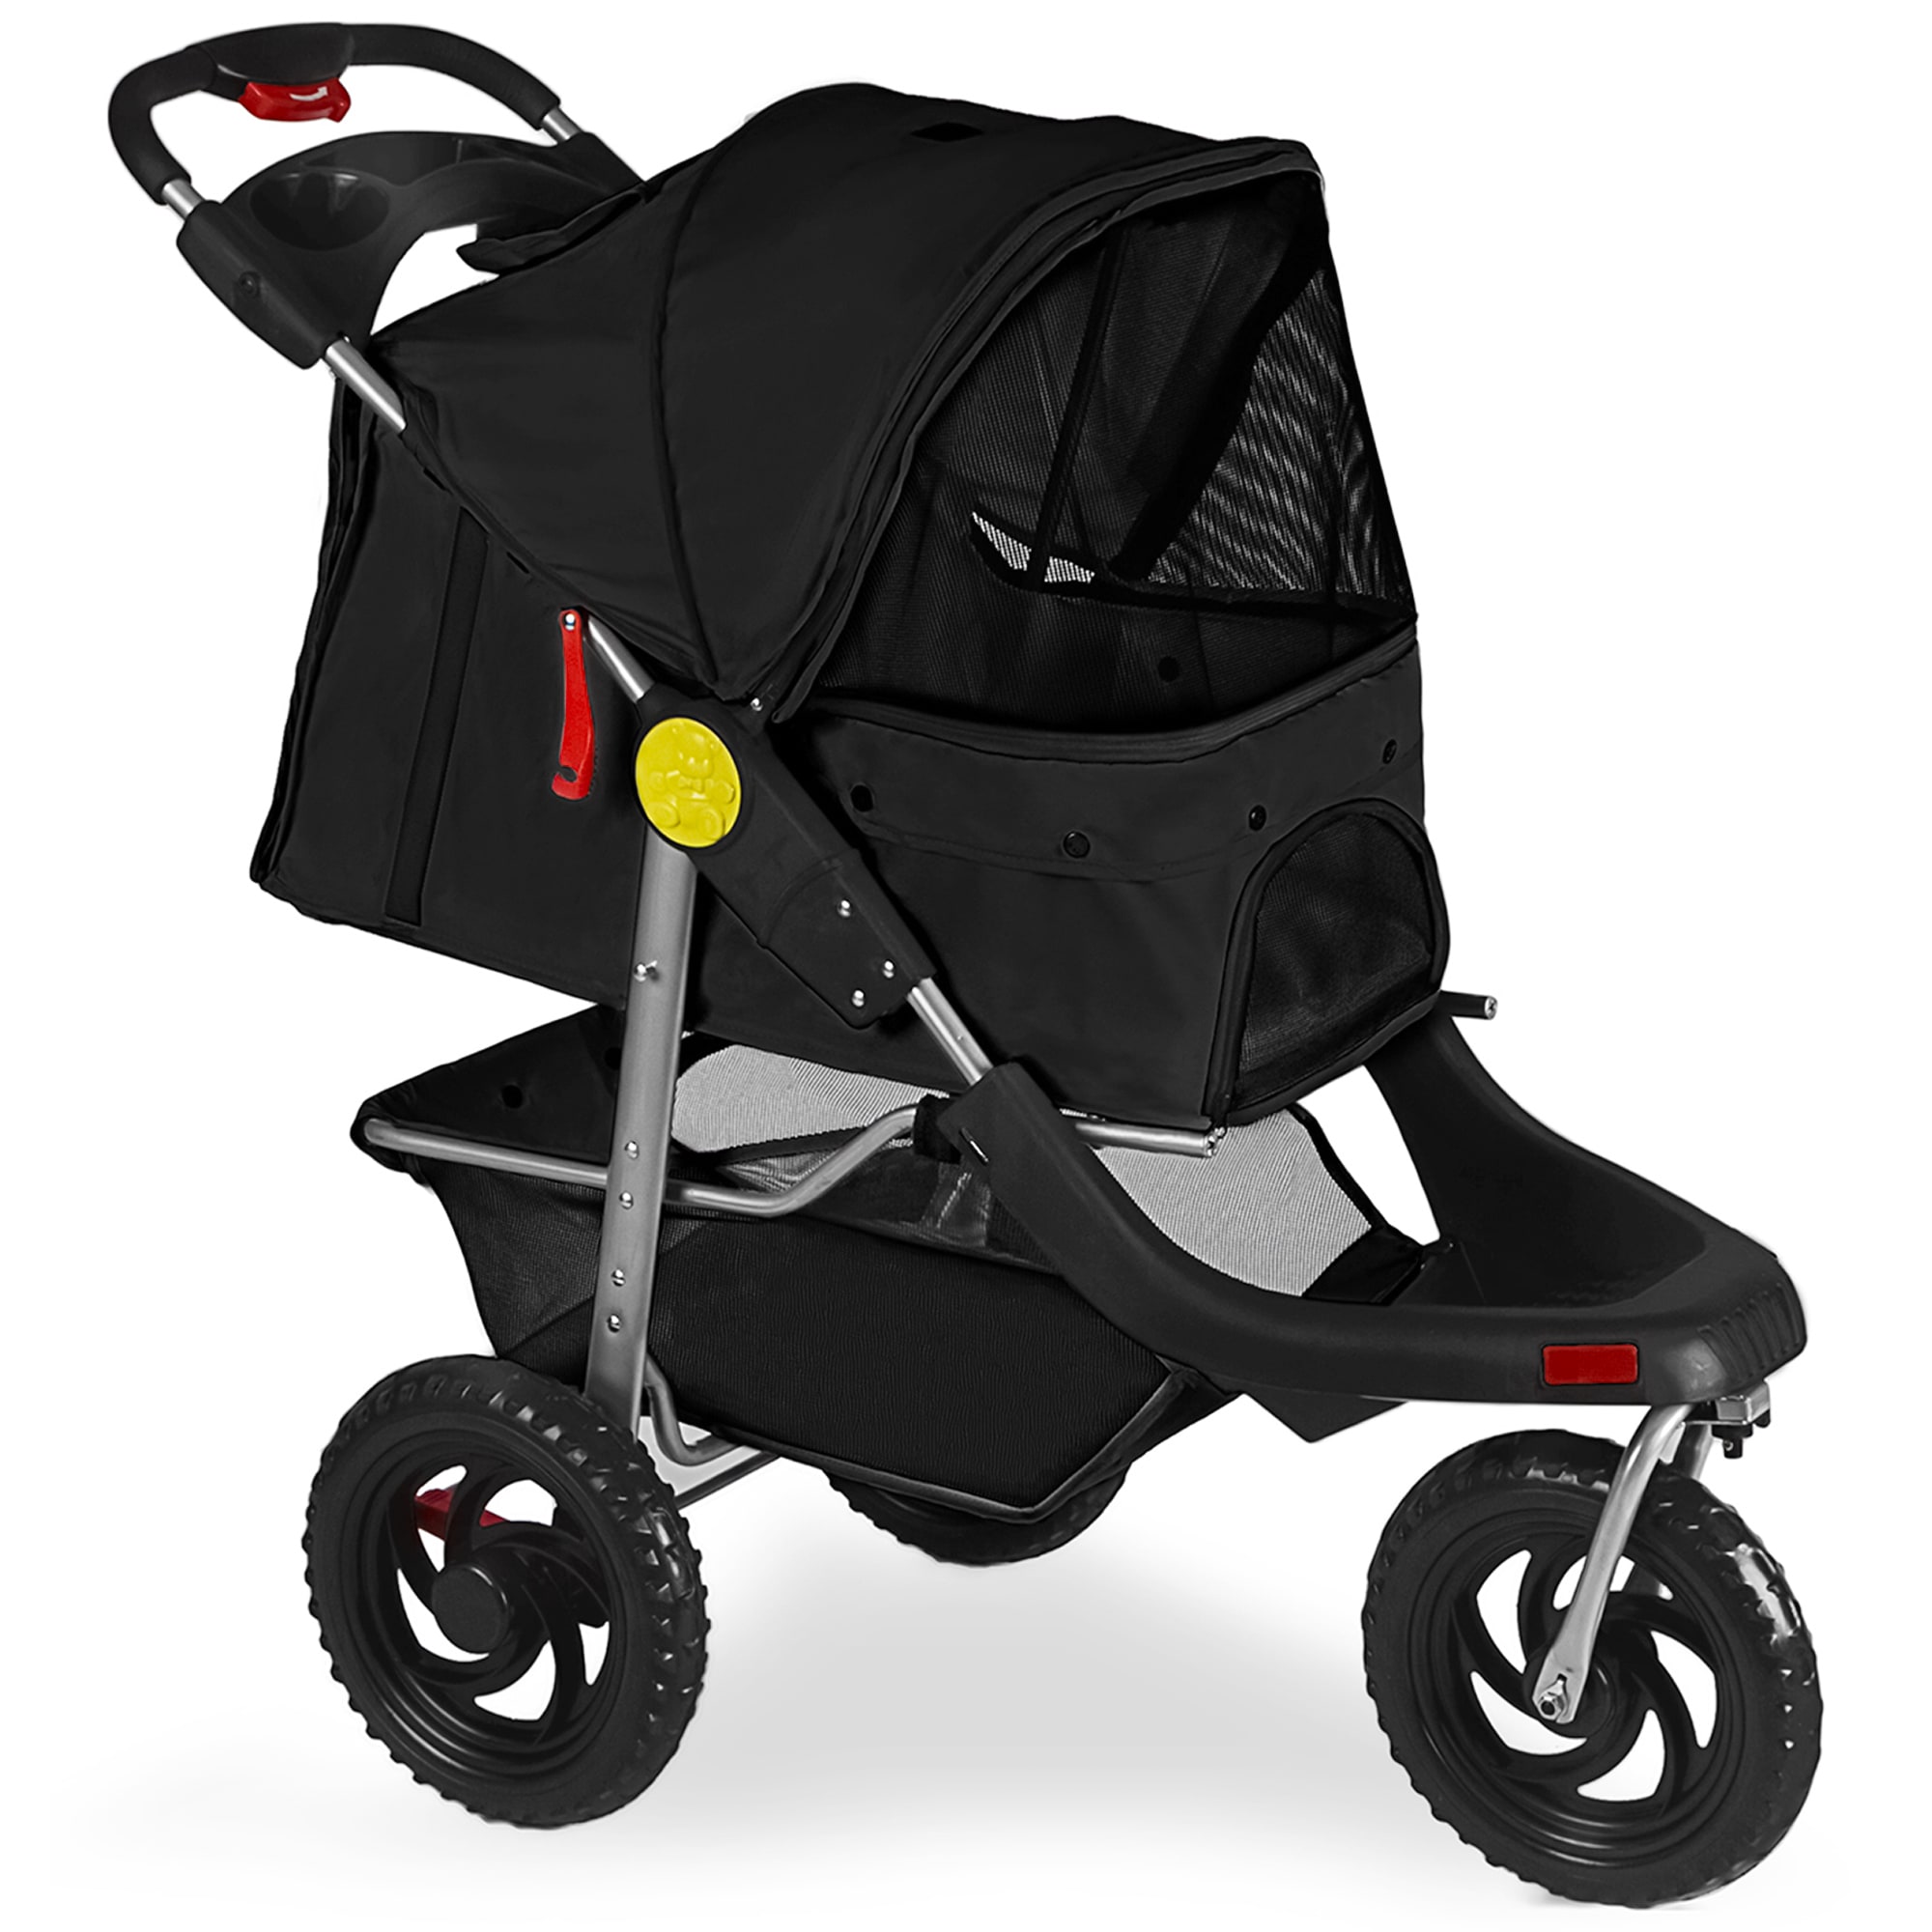 paws and pals stroller